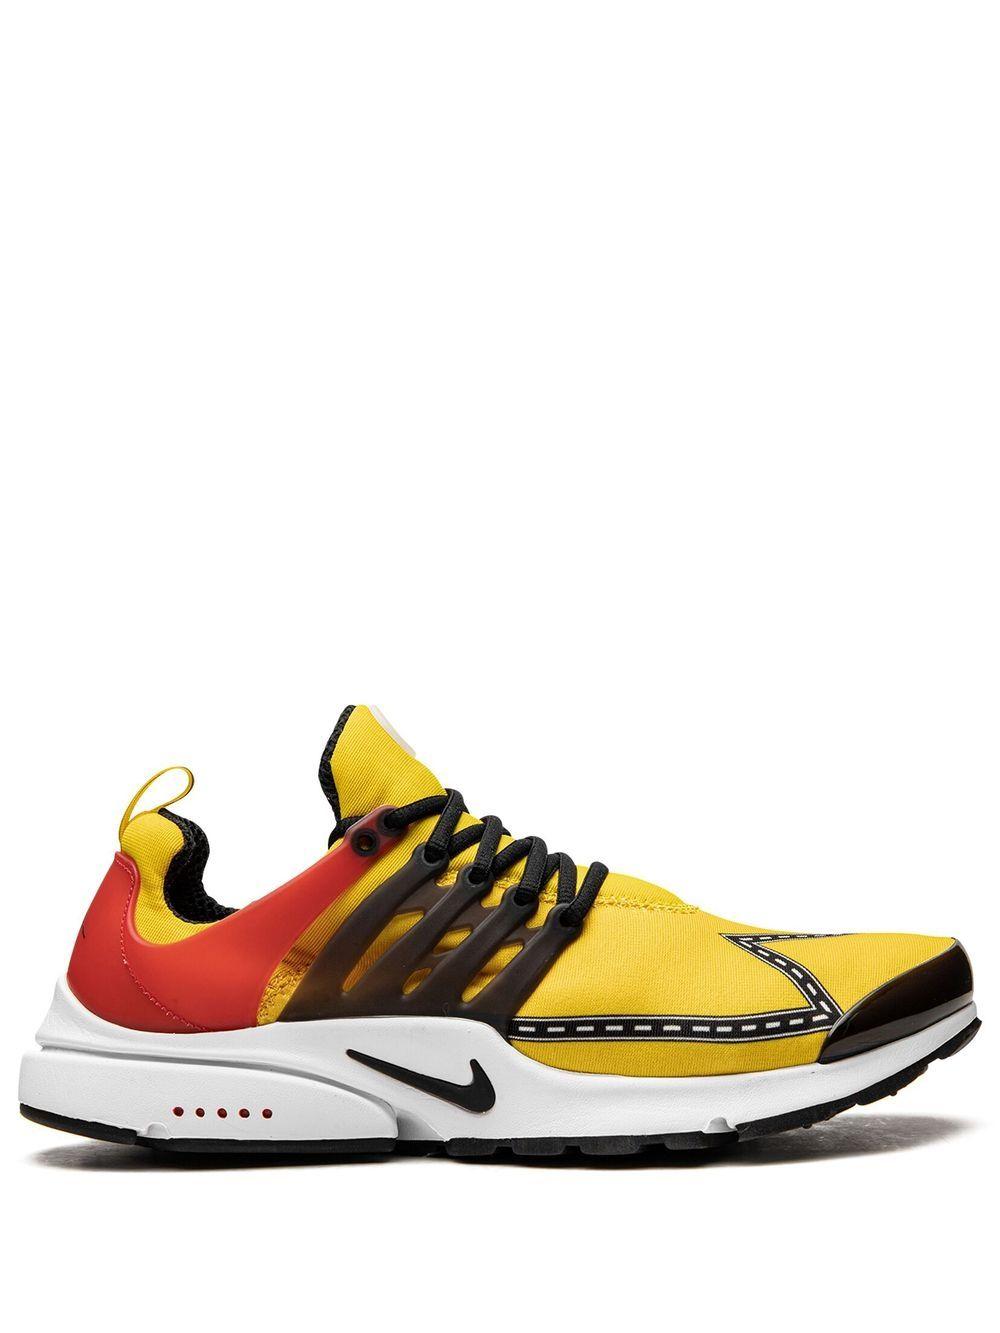 nike yellow air presto sports shoes for men